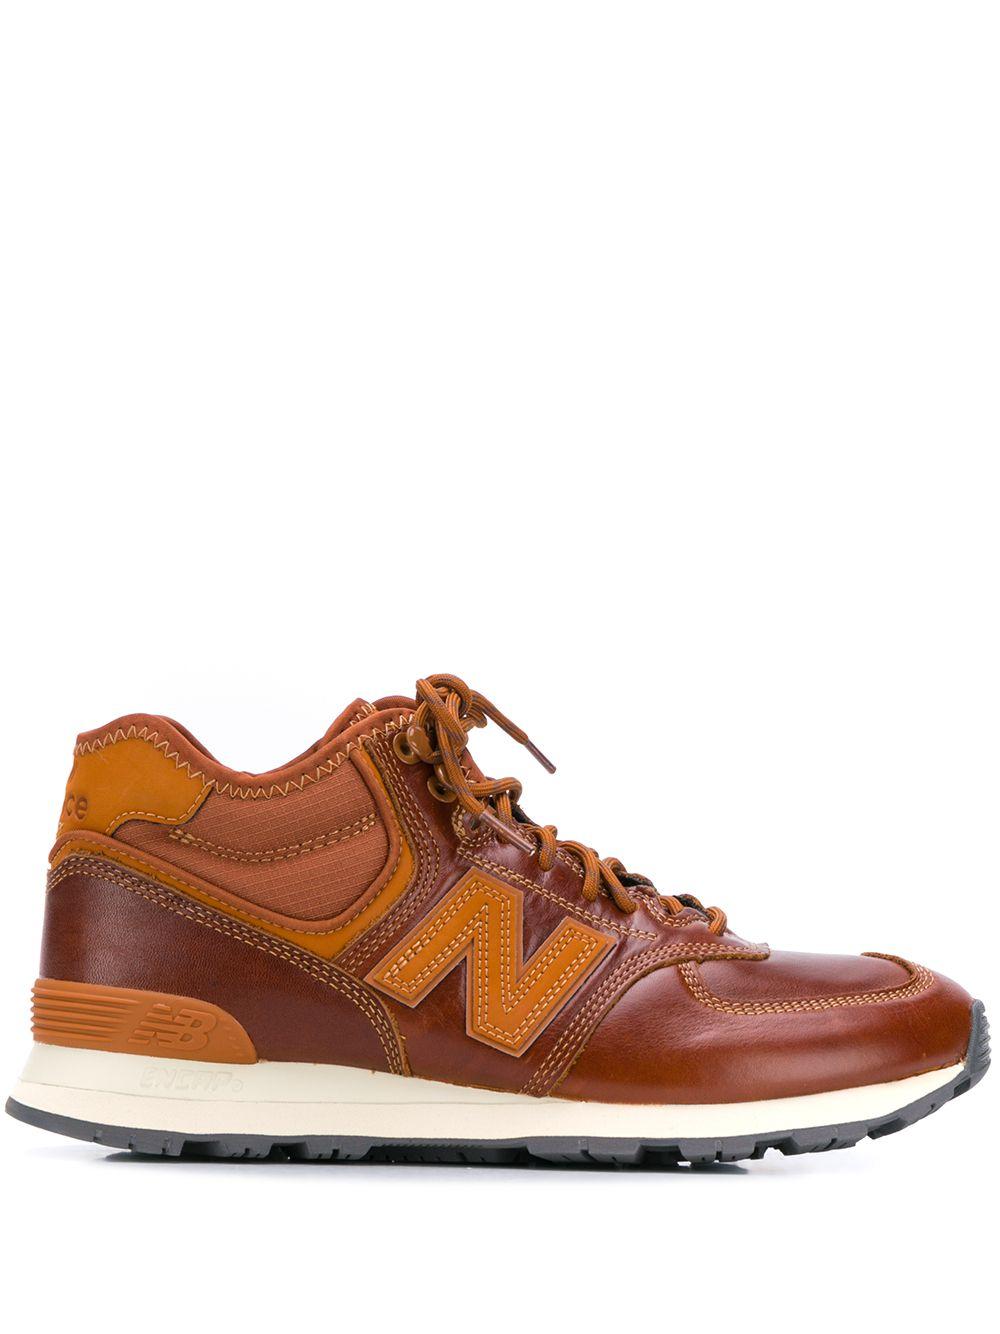 New Balance Leather Mh574v1 Sneakers in Brown for Men - Lyst